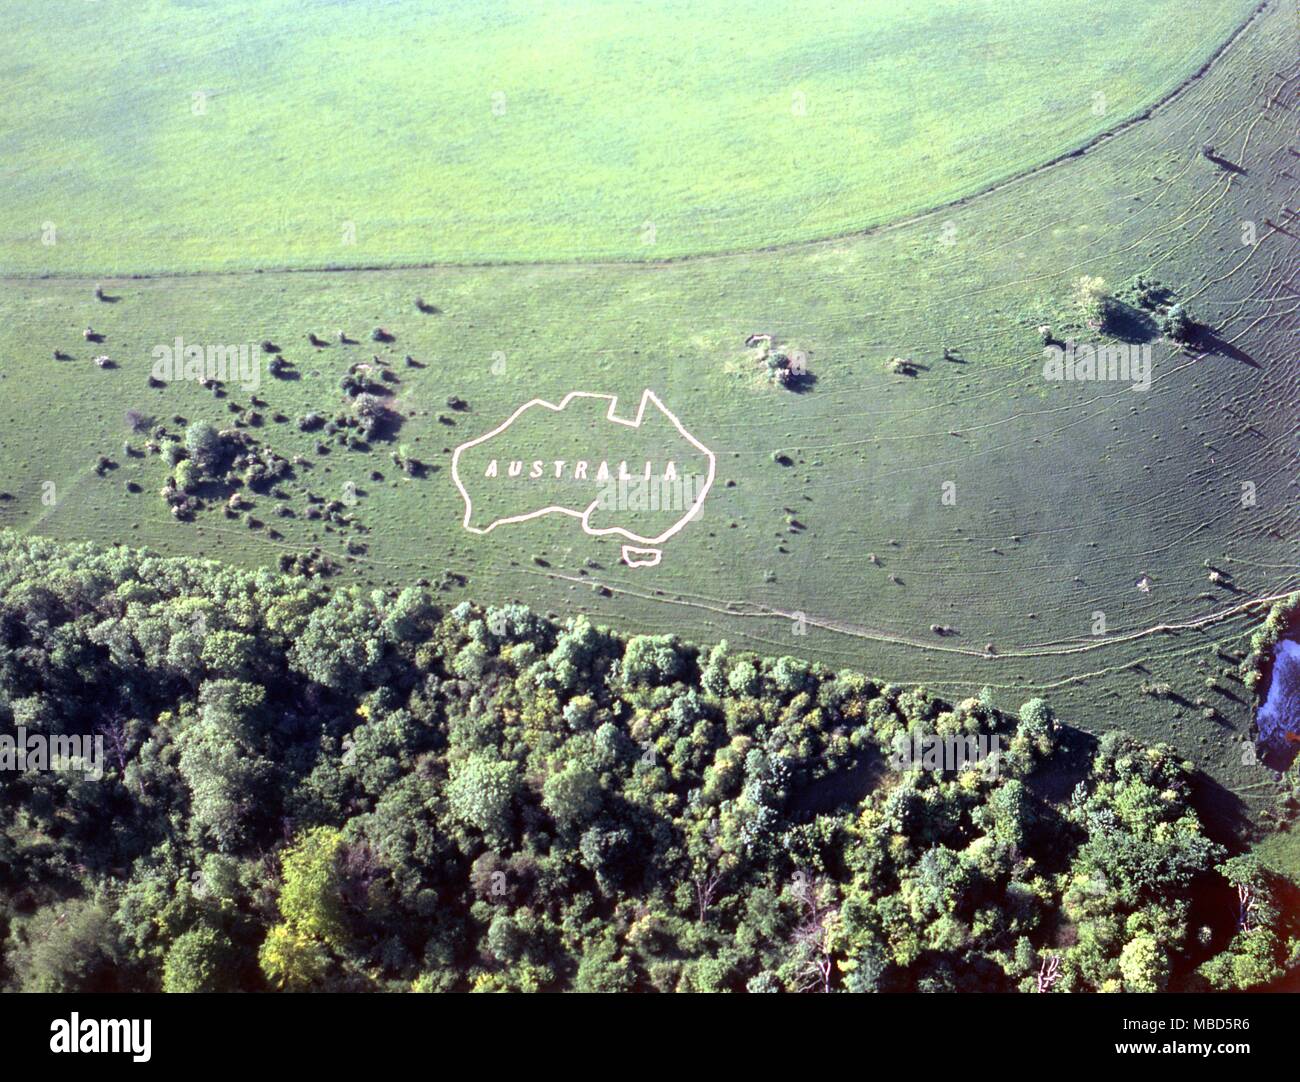 212 Chiselbury Camp (Fovant) Map of Australia cut into escarpment of Ancient camp at Chiselbury. ©2006 Charles Walker / Stock Photo